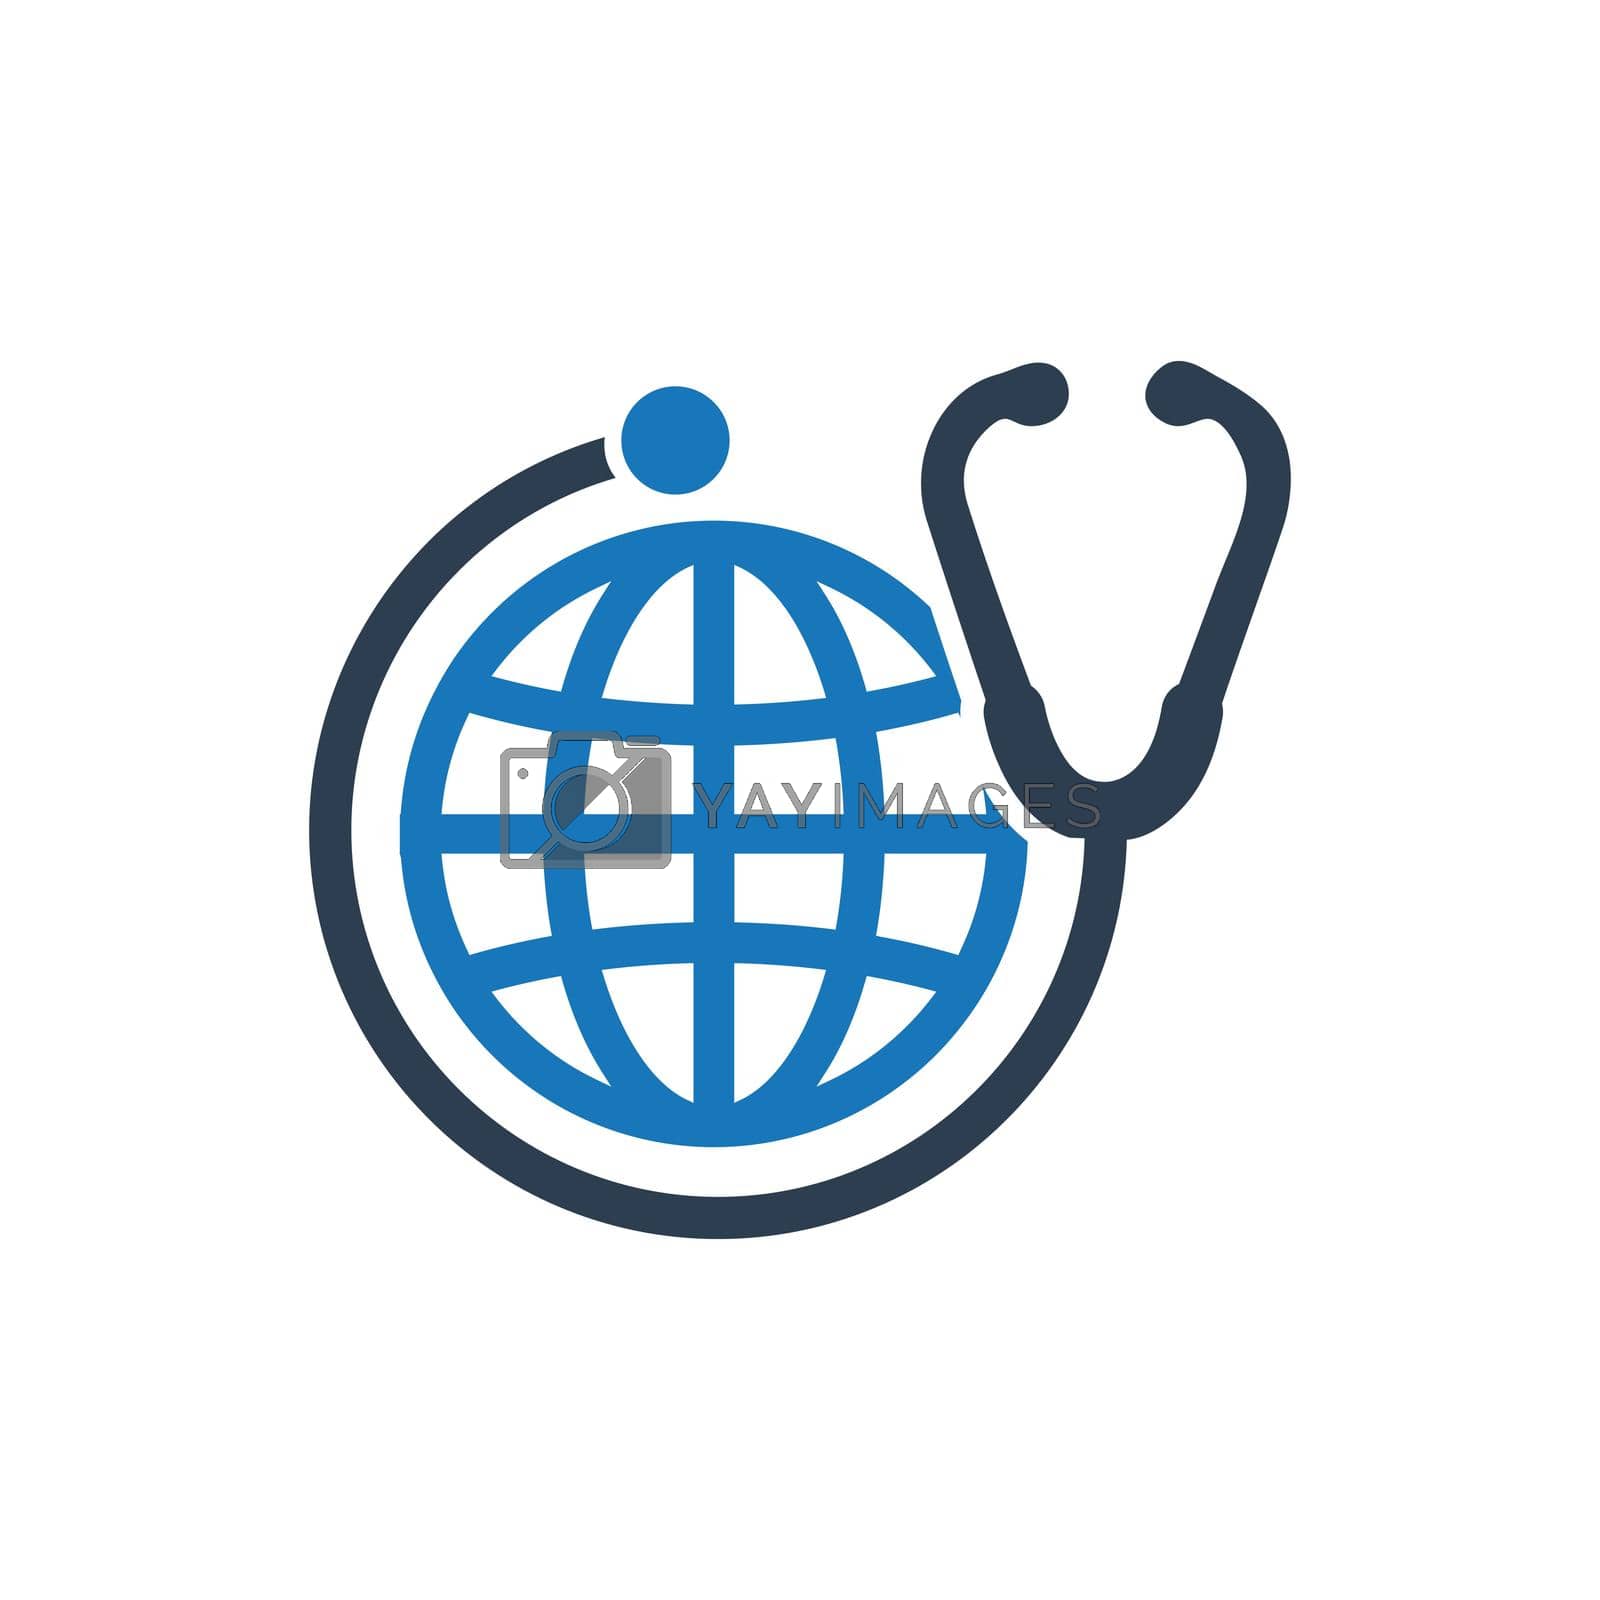 Global Healthcare icon. Vector EPS file.